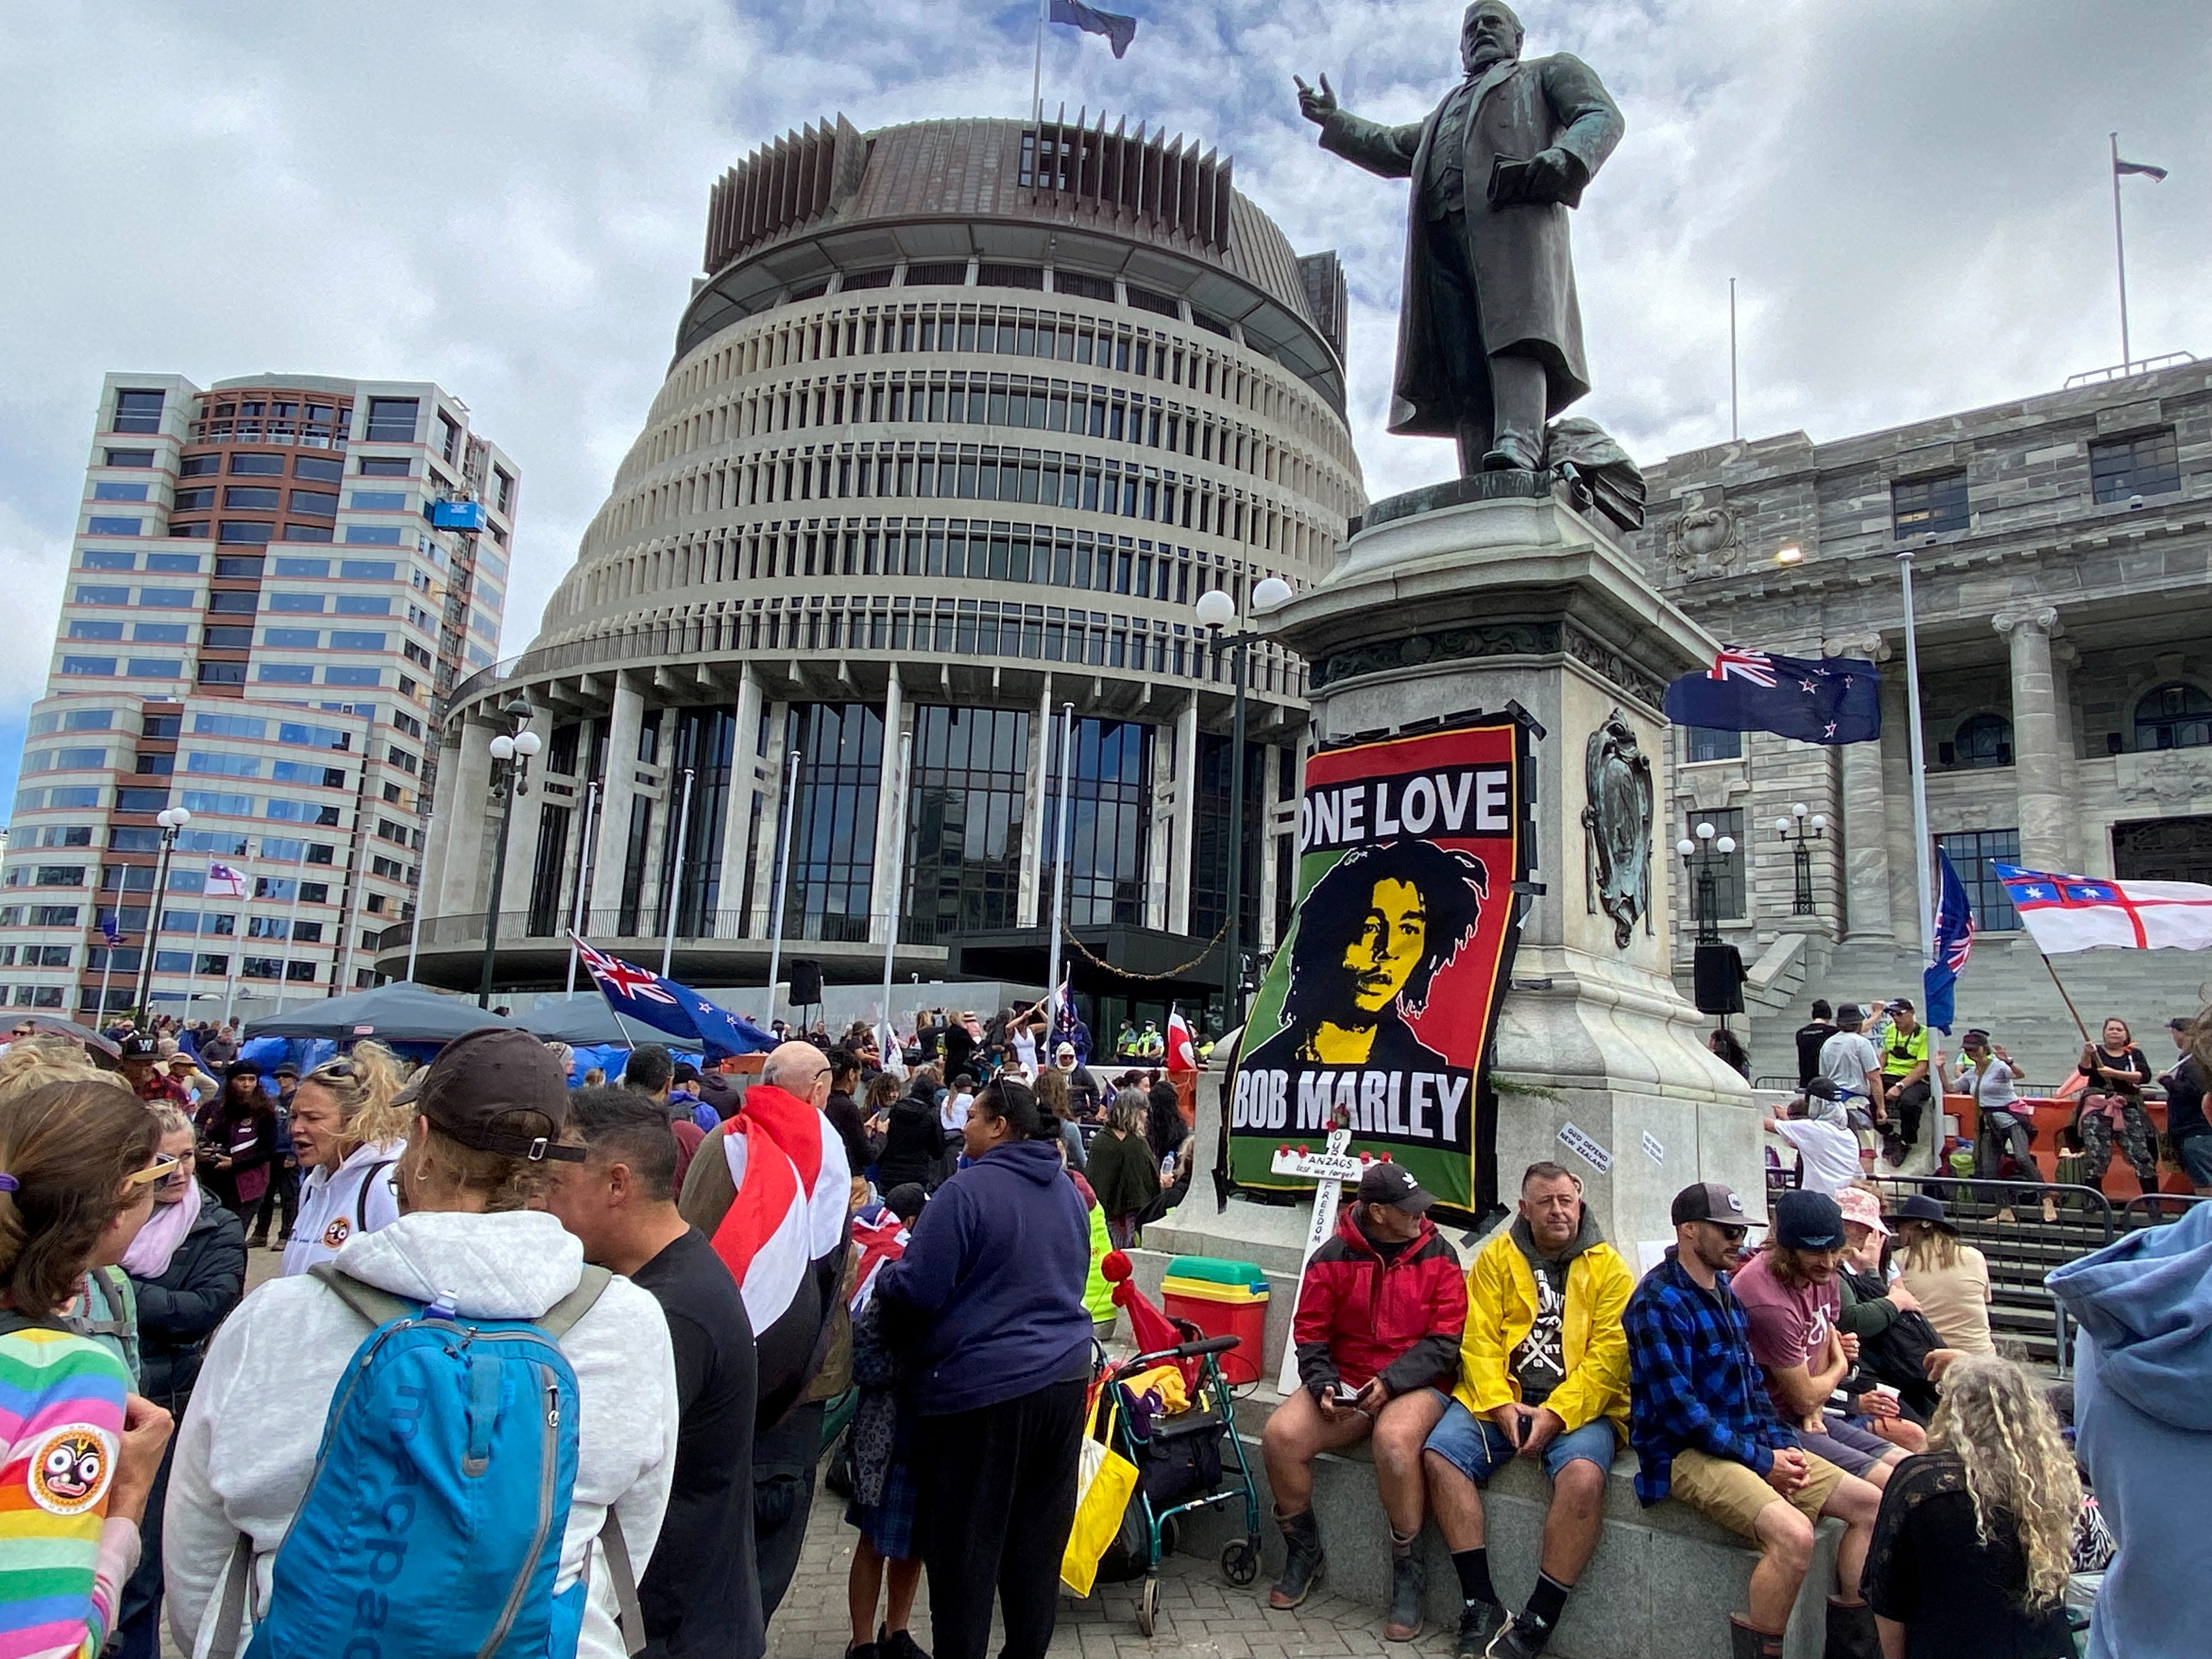 New Zealand police say talks not force best way to handle anti-vaccine protest